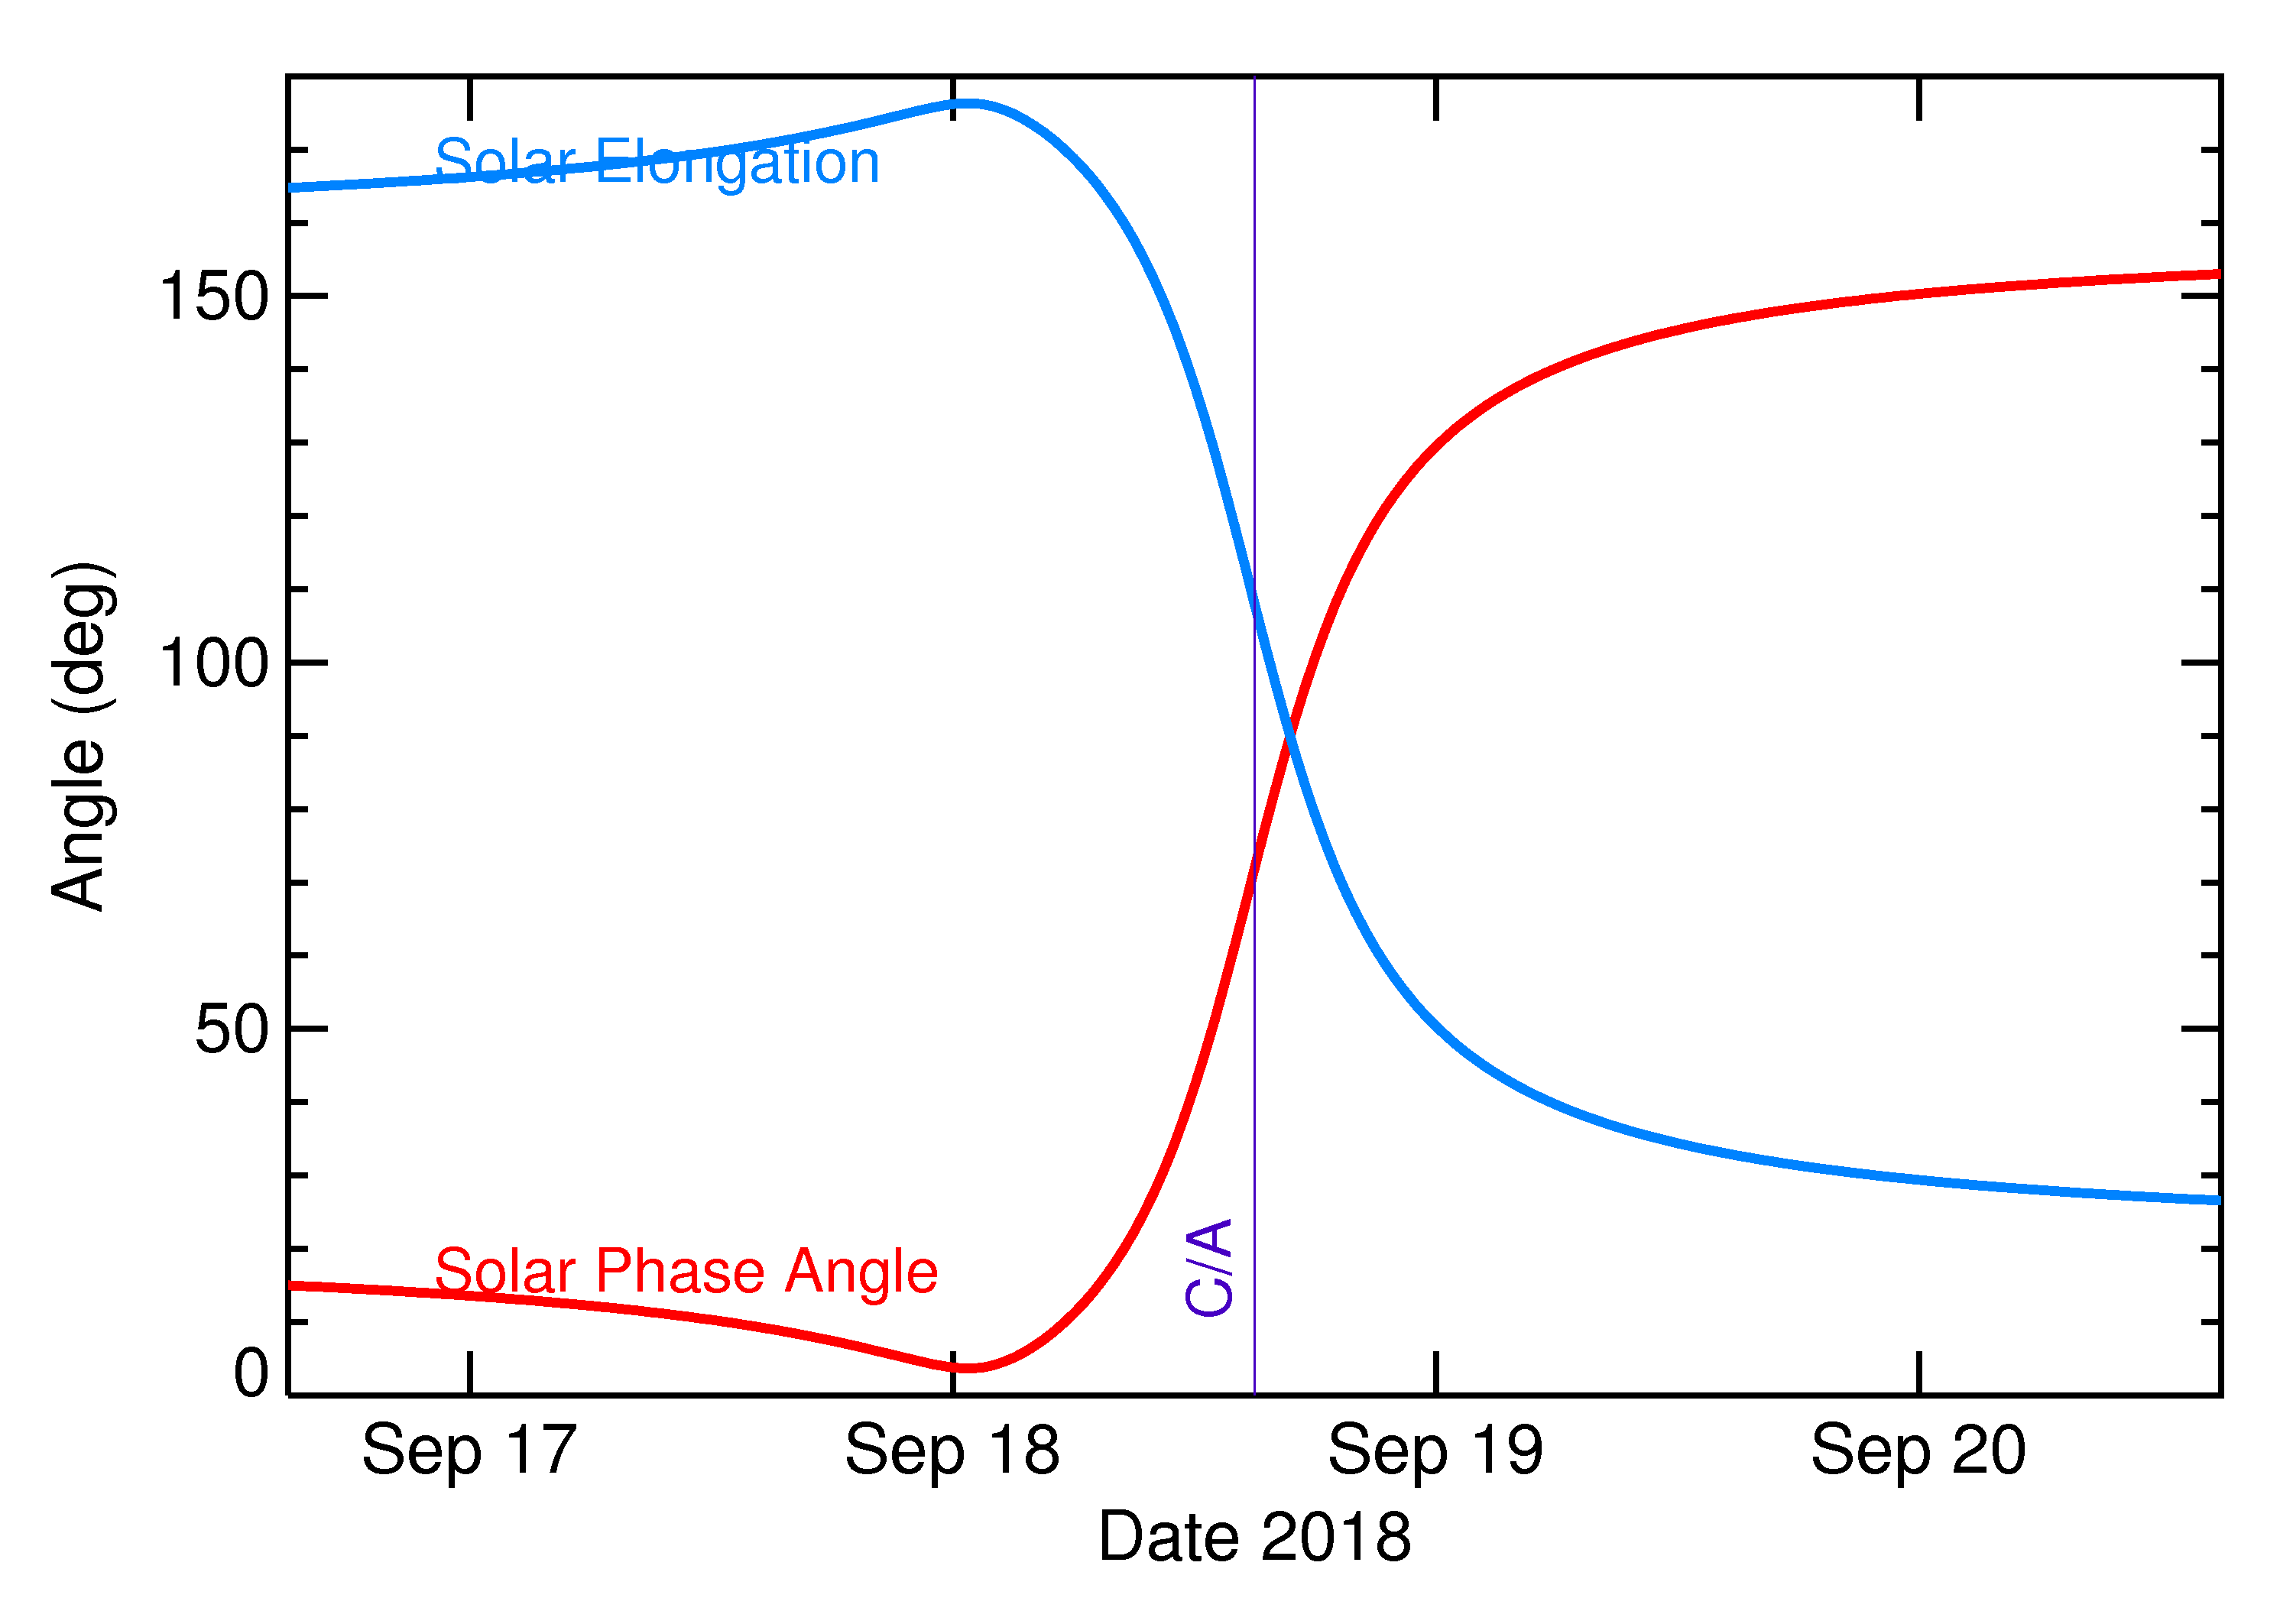 Solar Elongation and Solar Phase Angle of 2018 SC in the days around closest approach